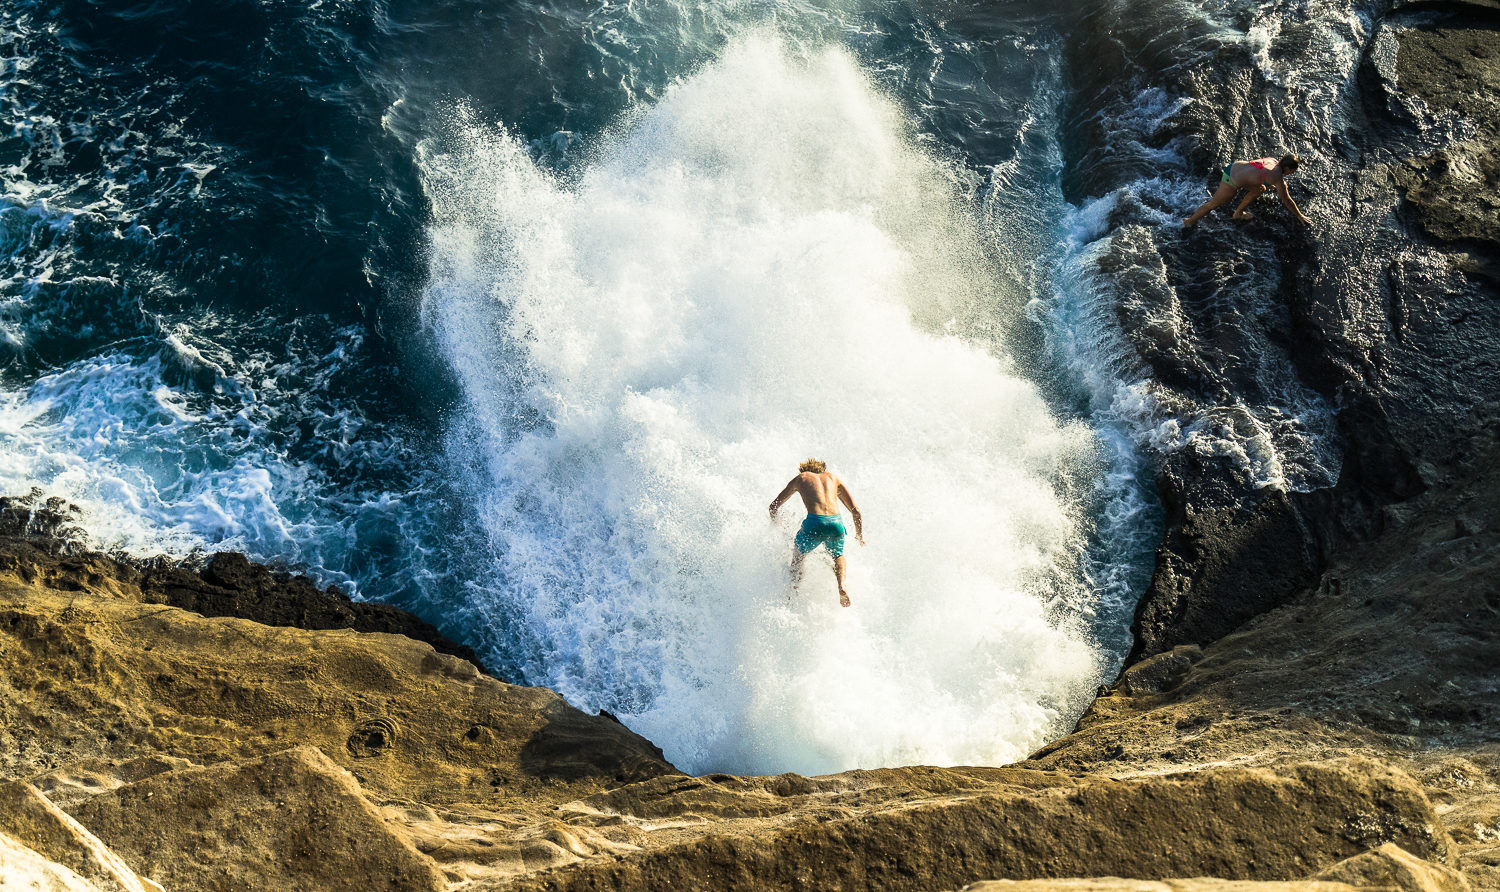 Spitting cave cliff jumping on oahu hawaii.